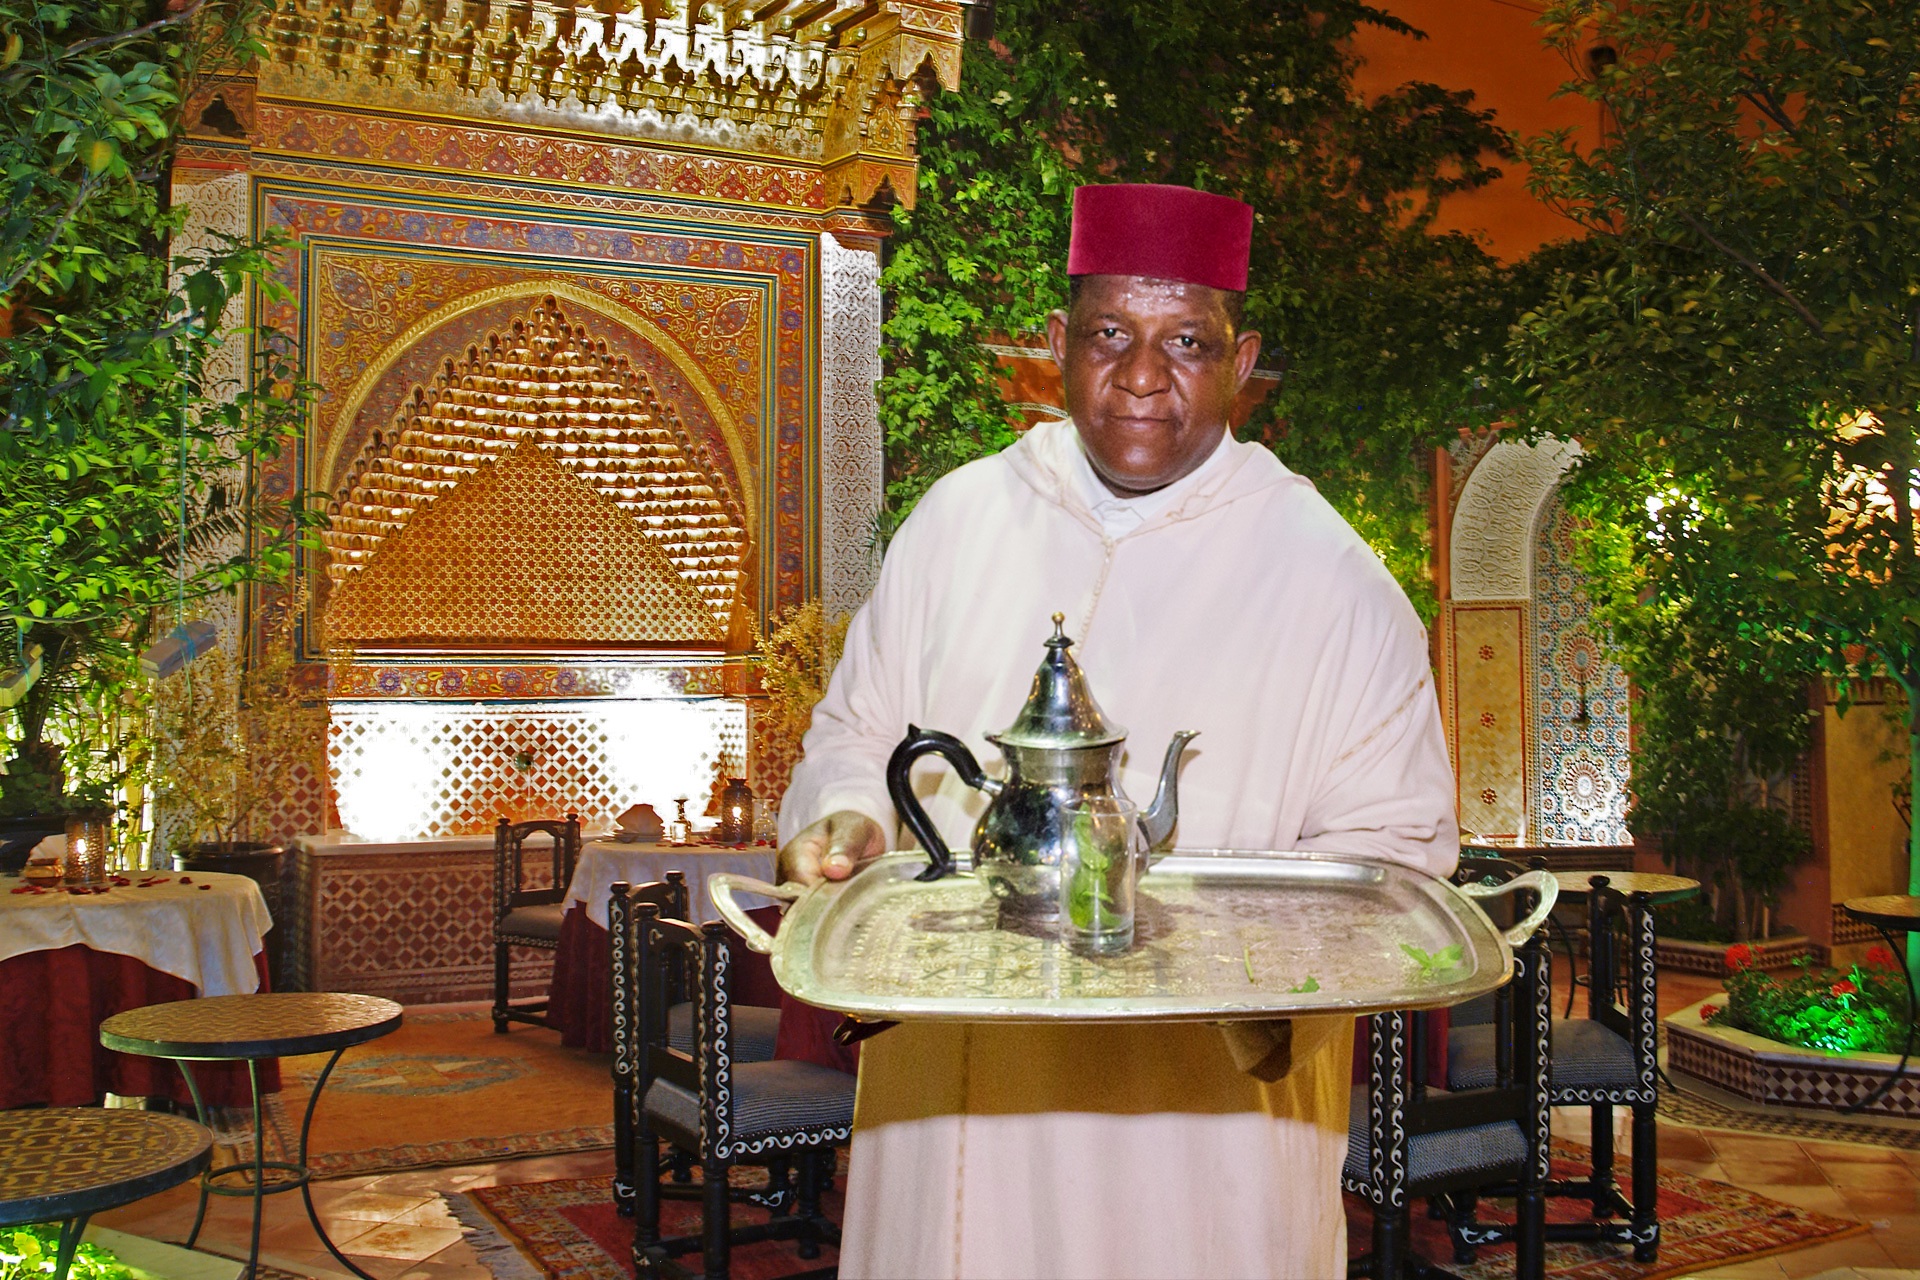 Incentives corporate business travel in Morocco for groups companies team building